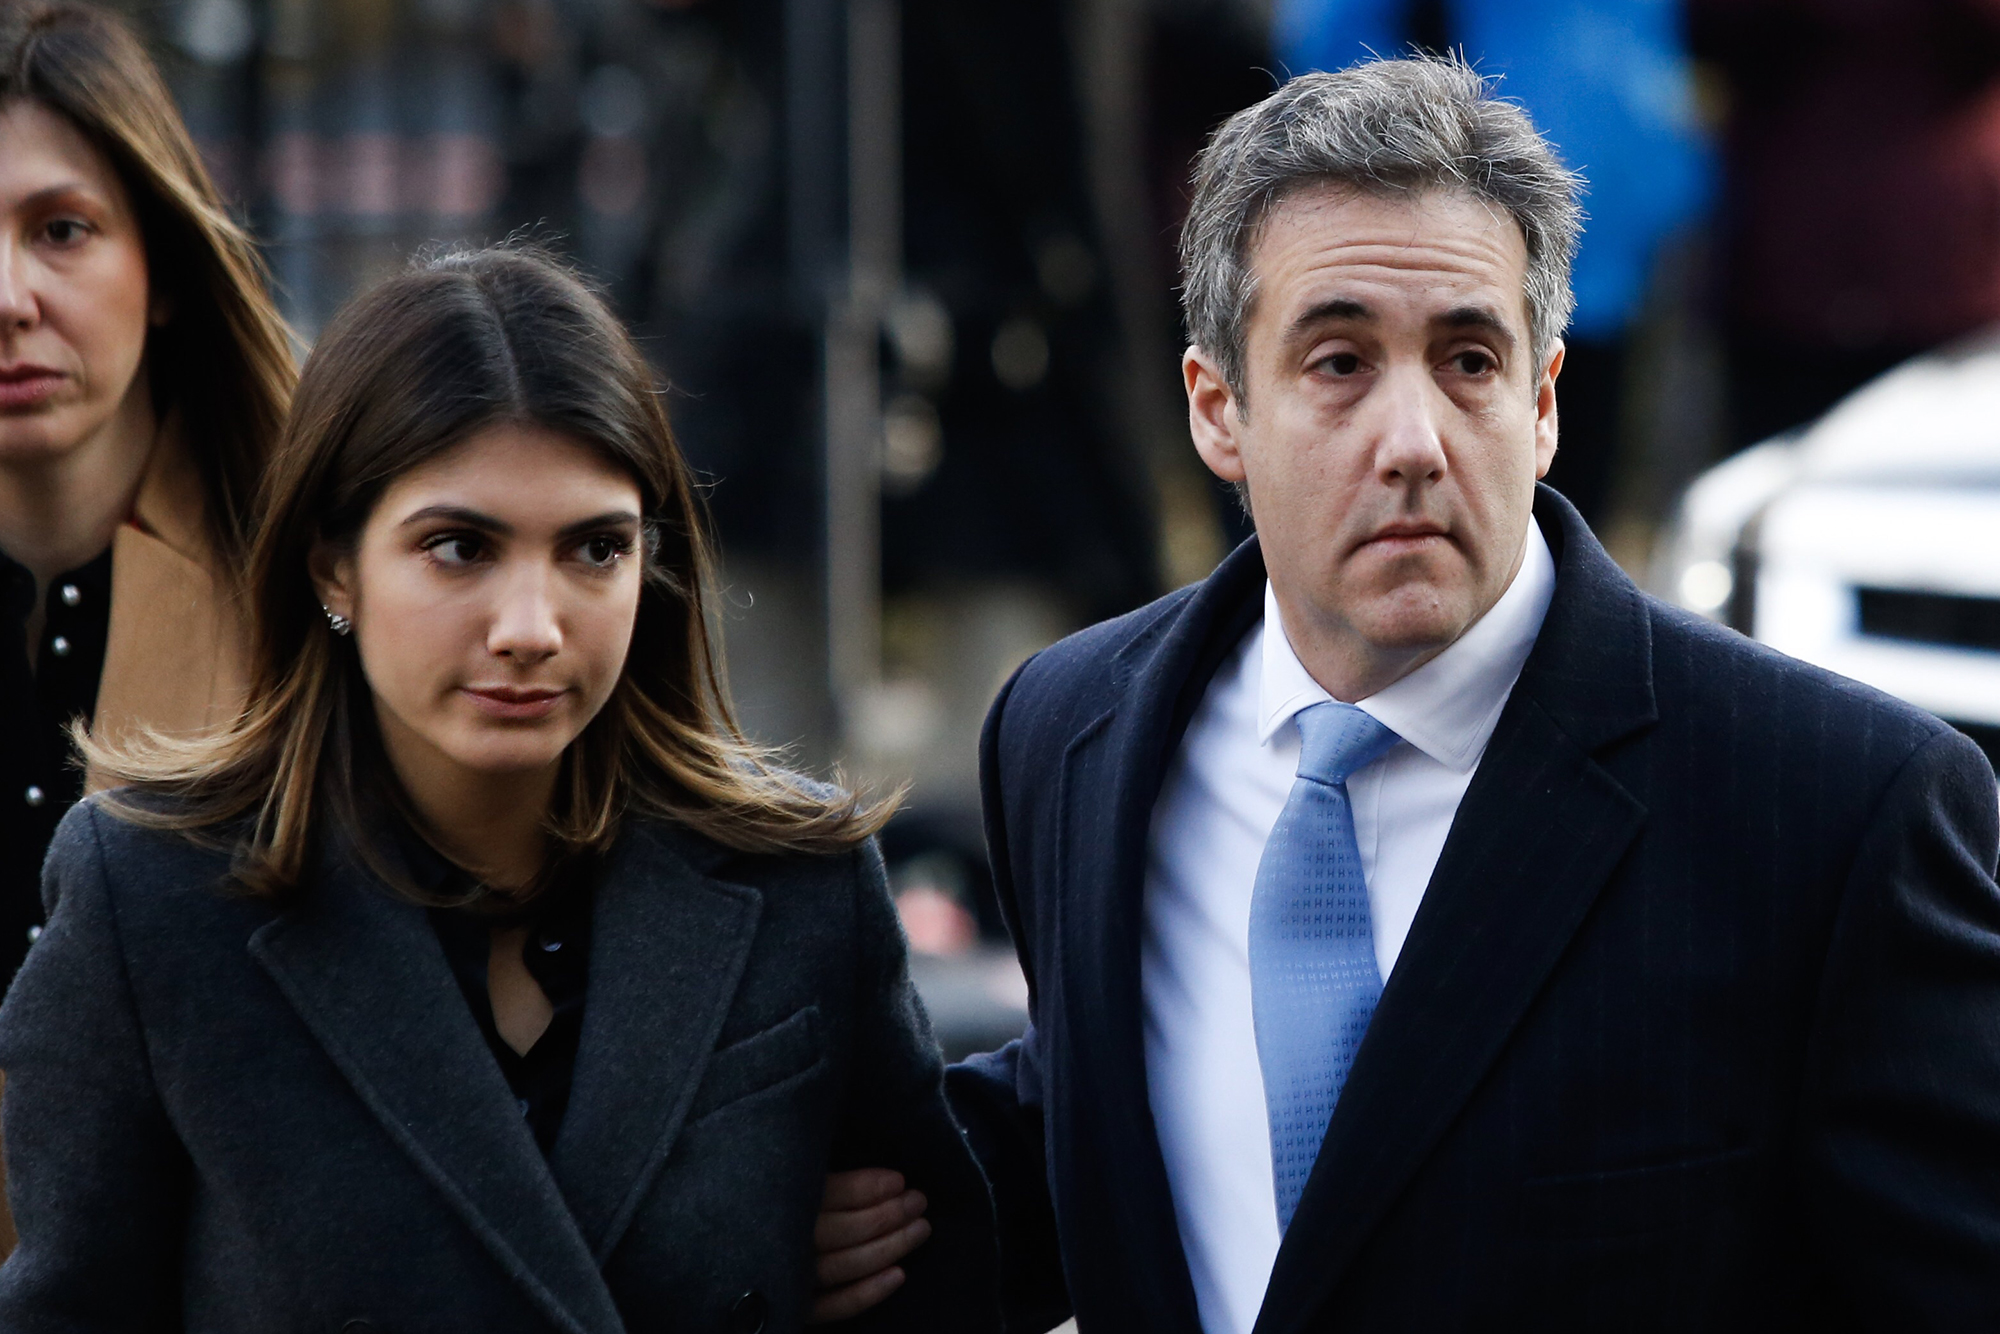 Michael Cohen's daughter 'trying for normalcy' after prison sentence